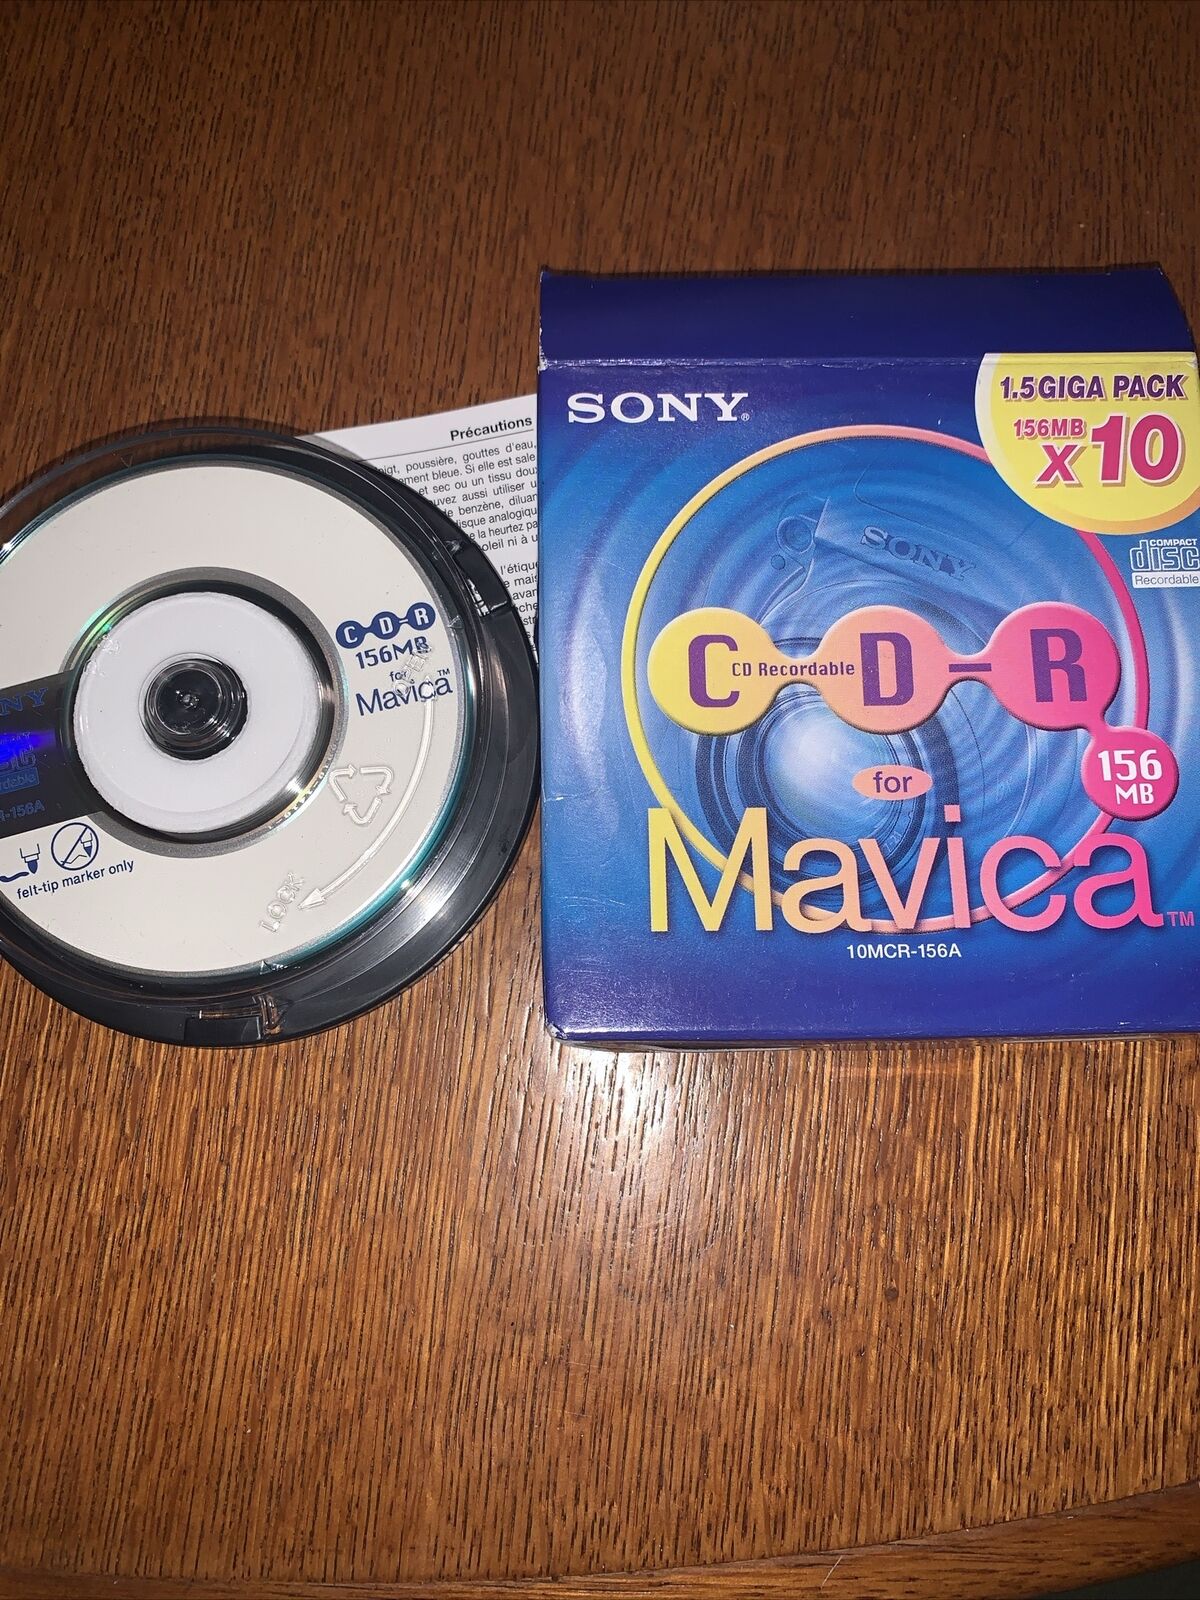 SONY 10 PACK 156MB RECORDABLE COMPACT DISC CD-R - MAVICA CAMERAS 10MCR-156A READ